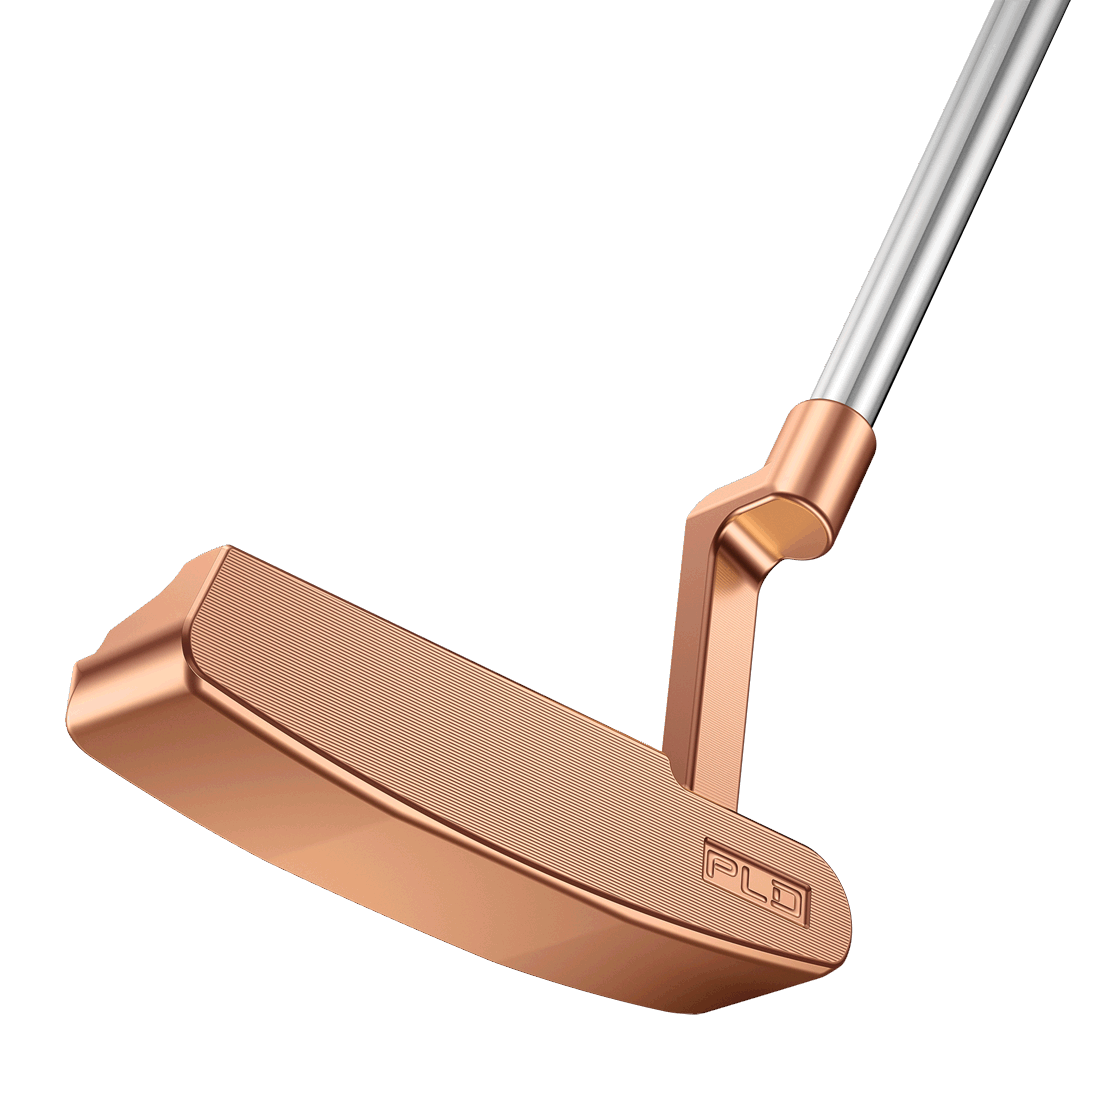 face view of PLD Limited Anser Patent 55 putter in copper with natural finish